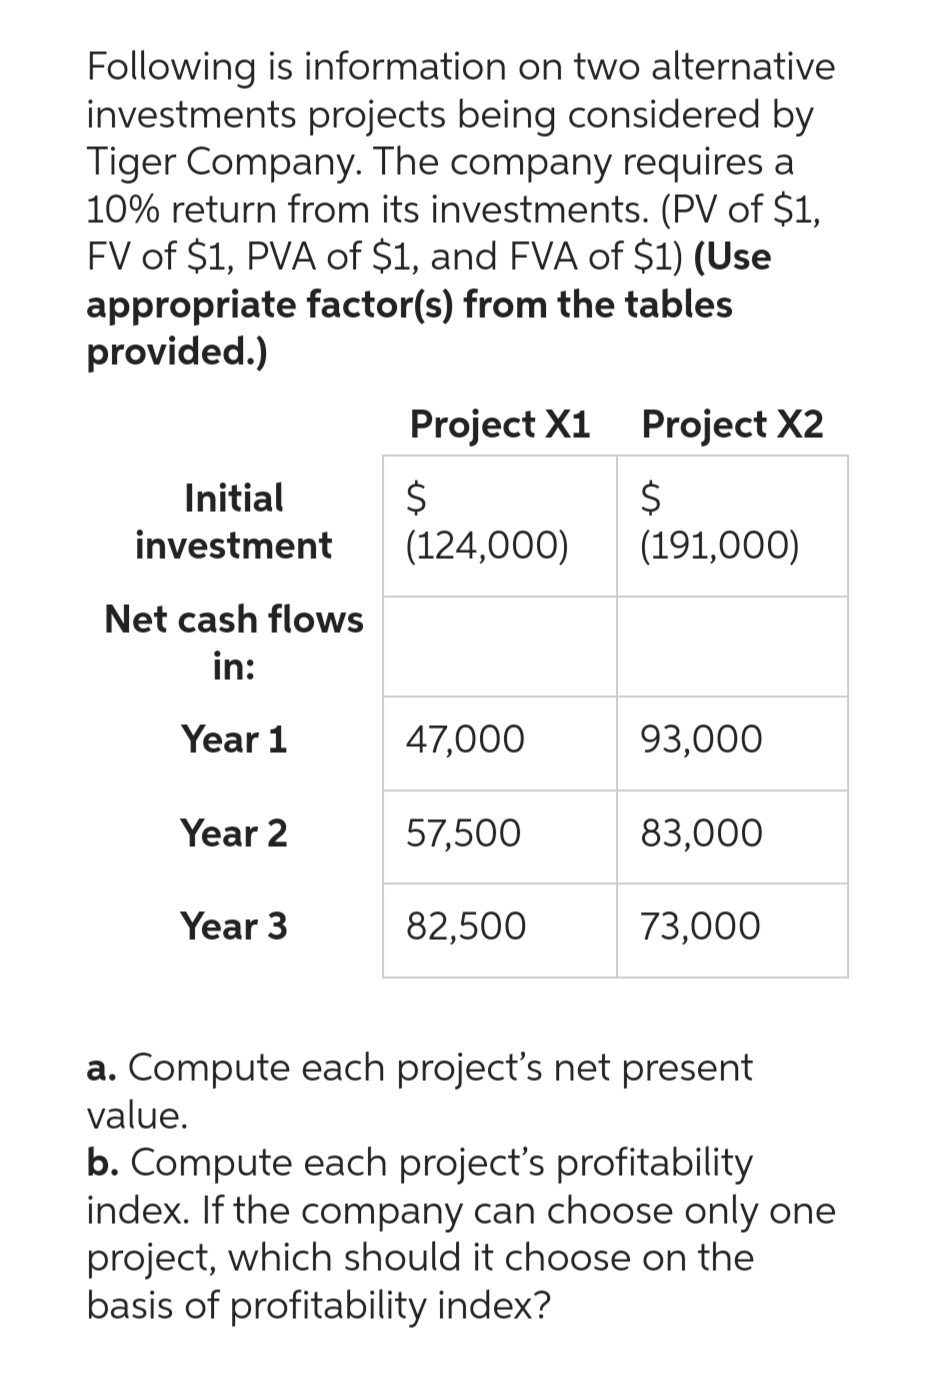 Following is information on two alternative
investments projects being considered by
Tiger Company. The company requires a
10% return from its investments. (PV of $1,
FV of $1, PVA of $1, and FVA of $1) (Use
appropriate factor(s) from the tables
provided.)
Initial
investment
Net cash flows
in:
Year 1
Year 2
Year 3
Project X1 Project X2
$
$
(124,000)
(191,000)
47,000
57,500
82,500
93,000
83,000
73,000
a. Compute each project's net present
value.
b. Compute each project's profitability
index. If the company can choose only one
project, which should it choose on the
basis of profitability index?